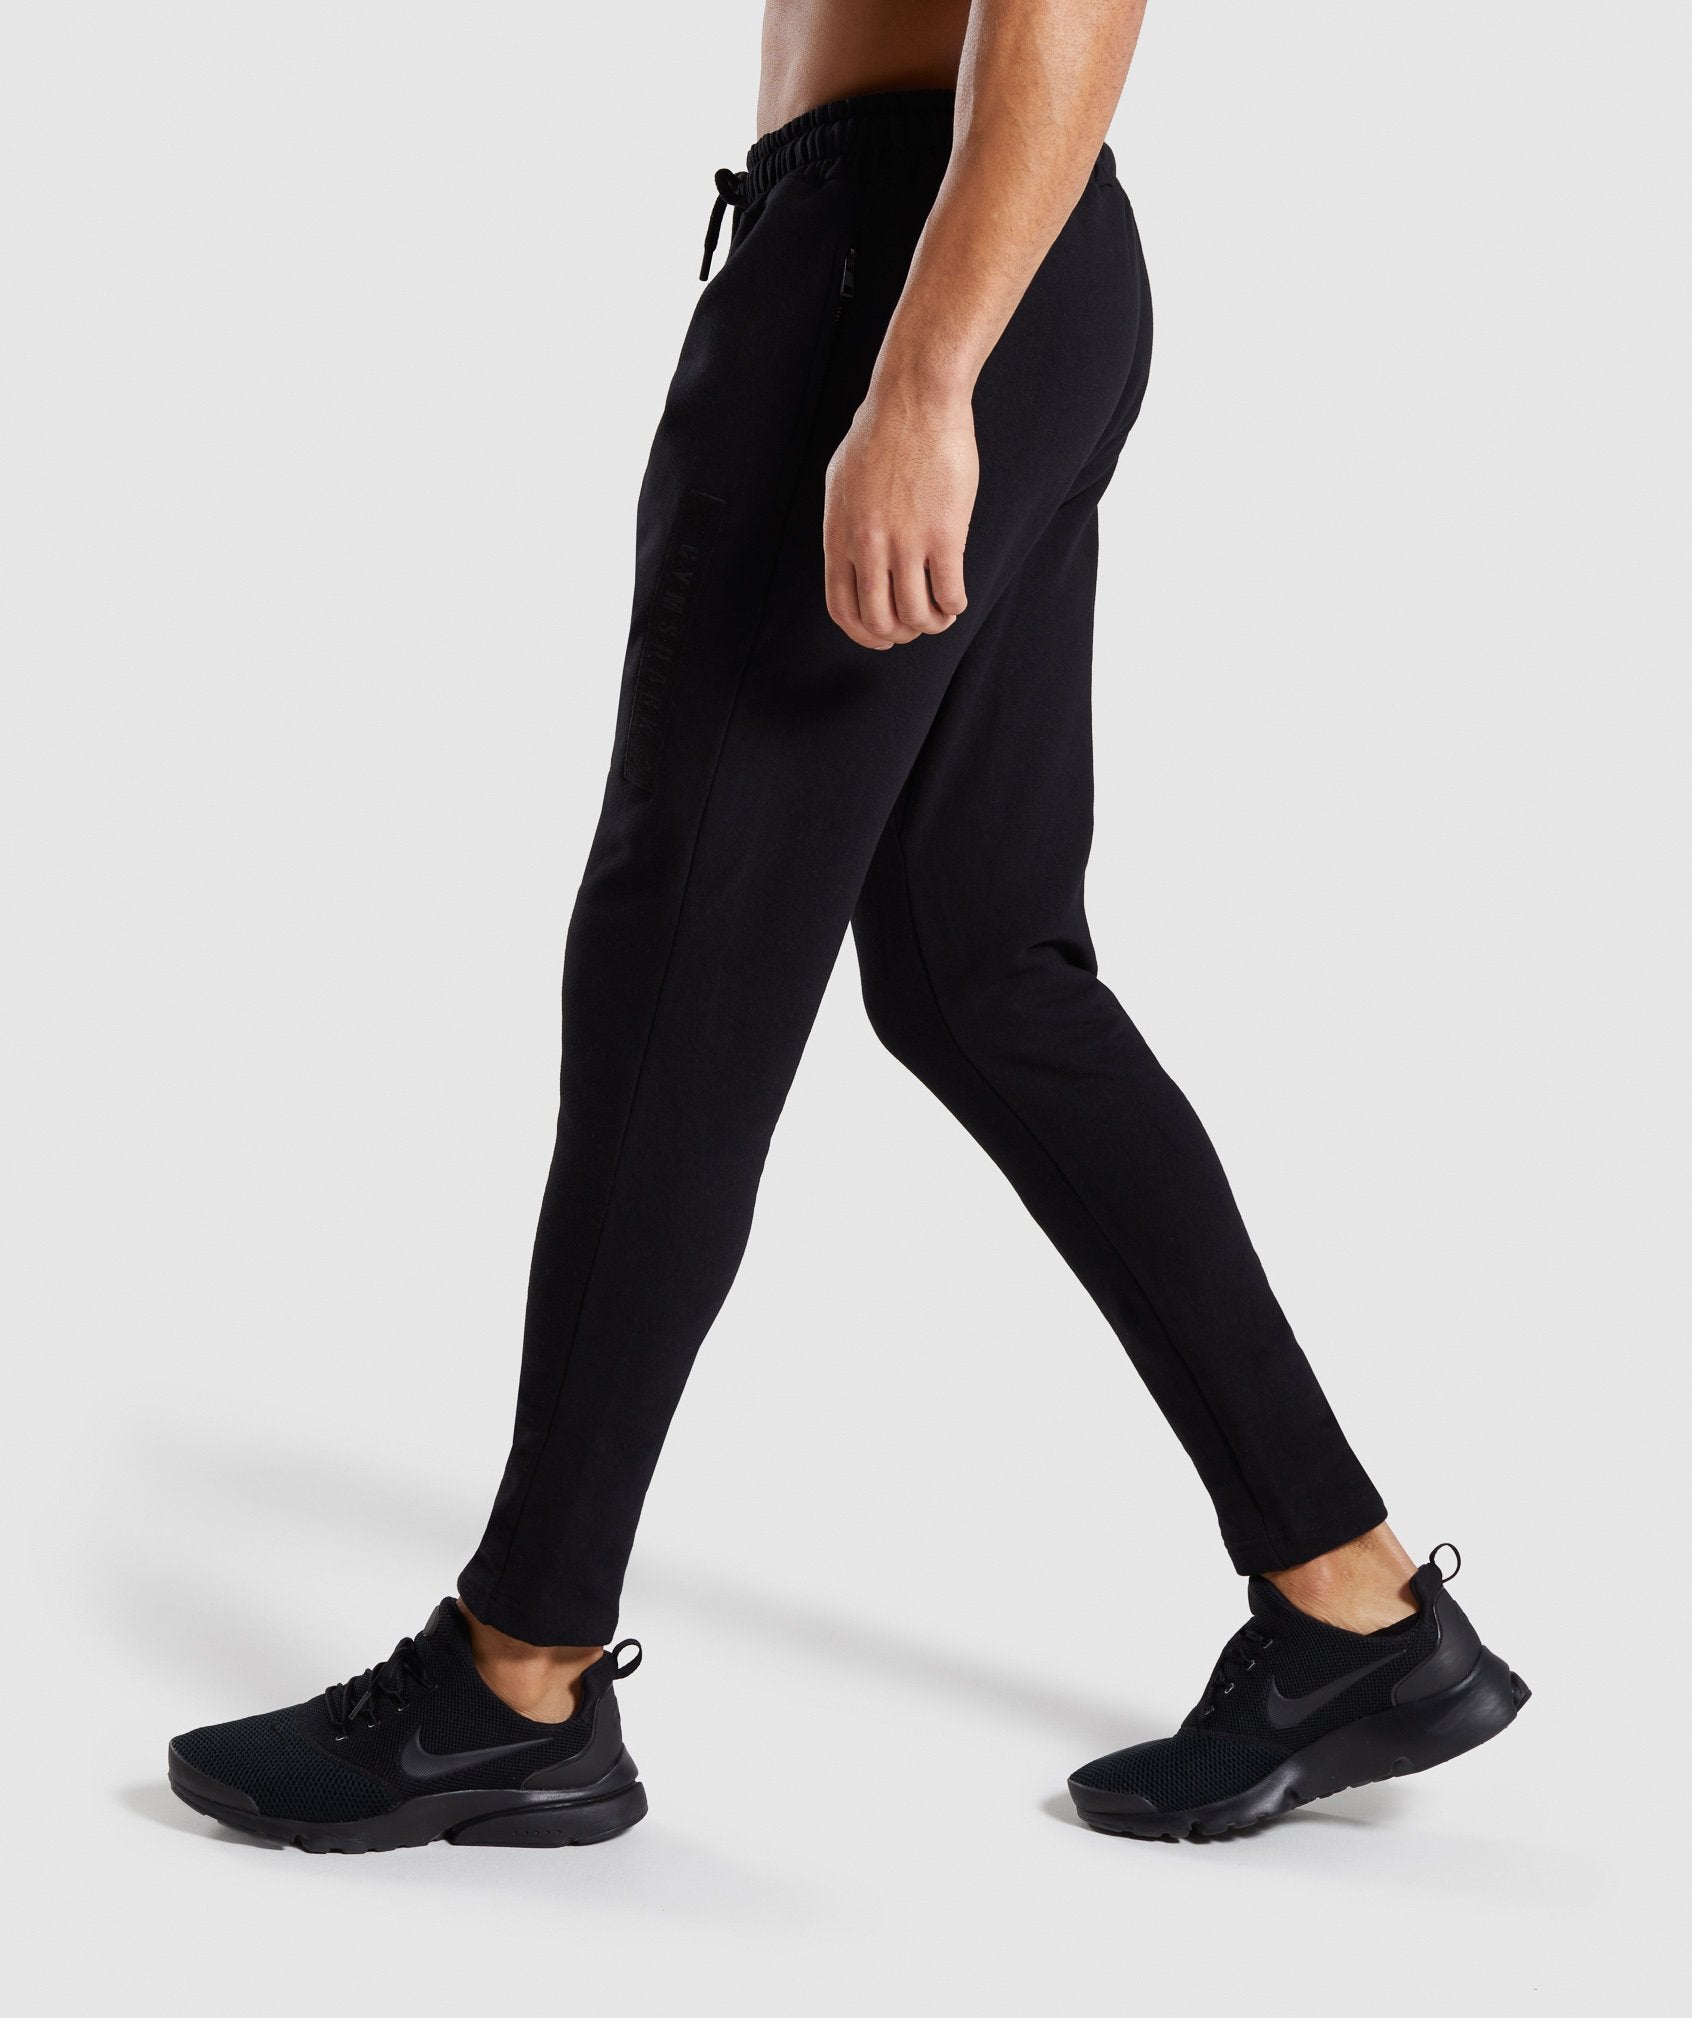 Crucial Jogger in Black - view 3